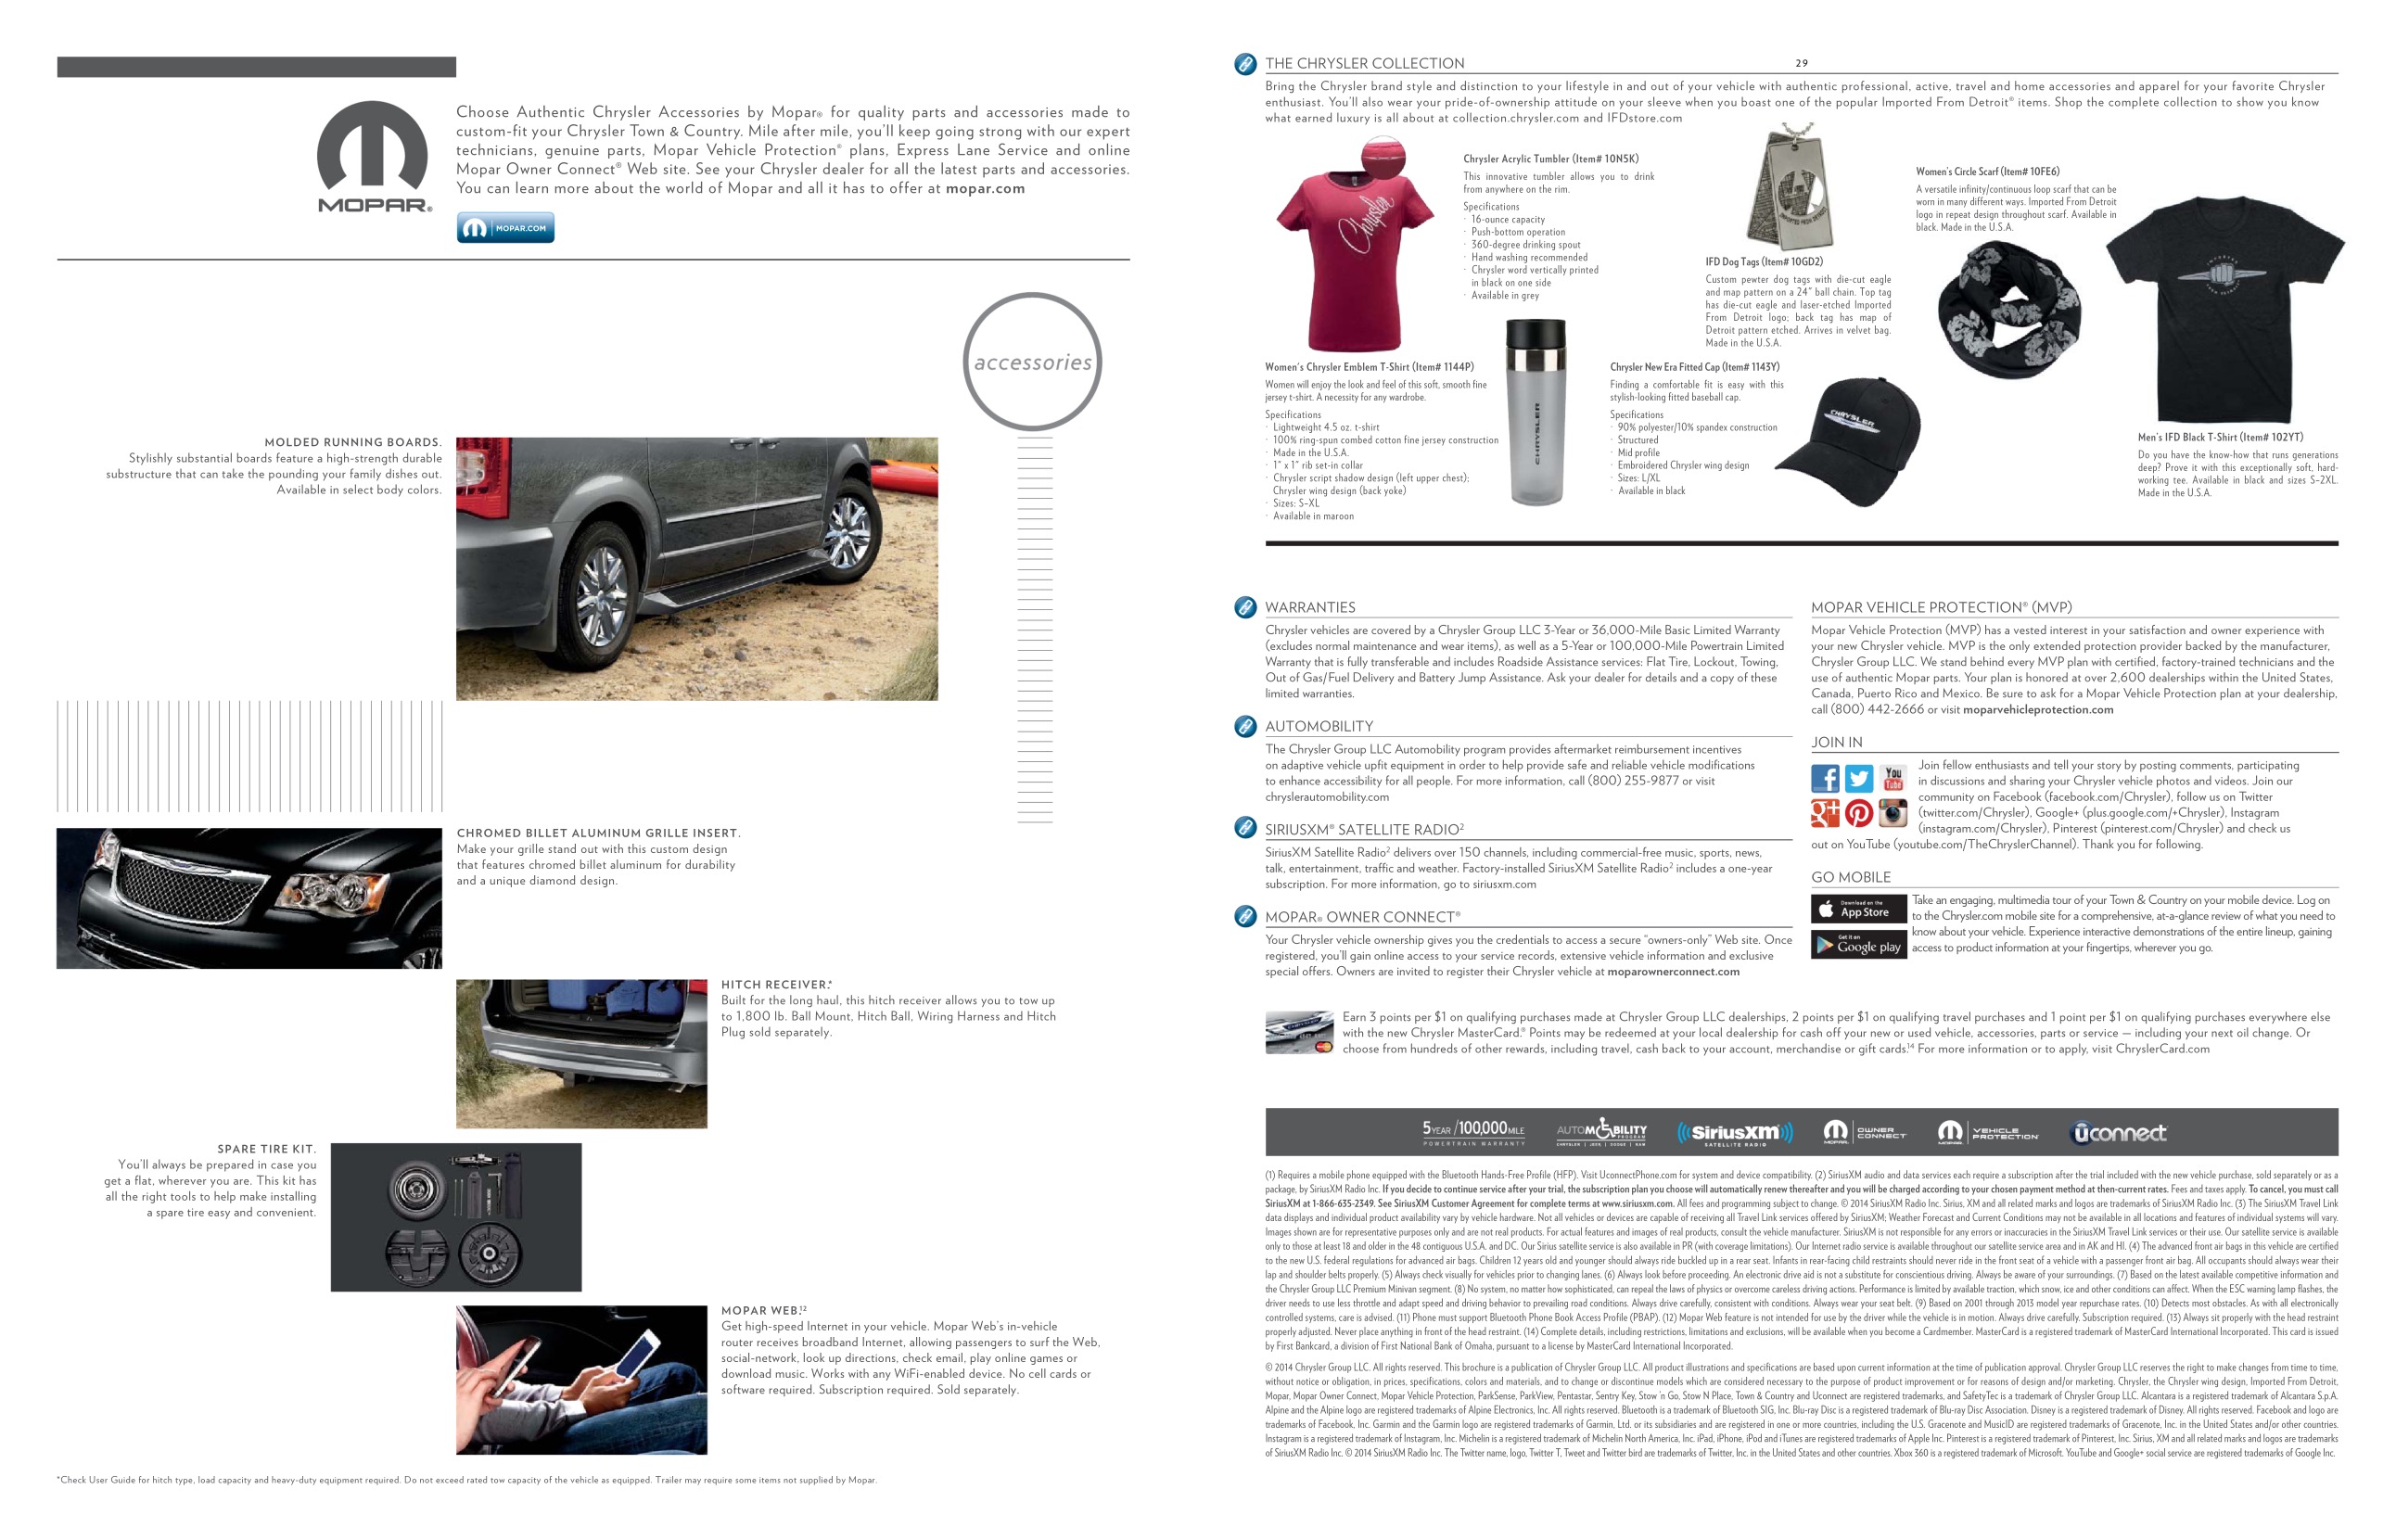 2015 Chrysler Town & Country Brochure Page 12